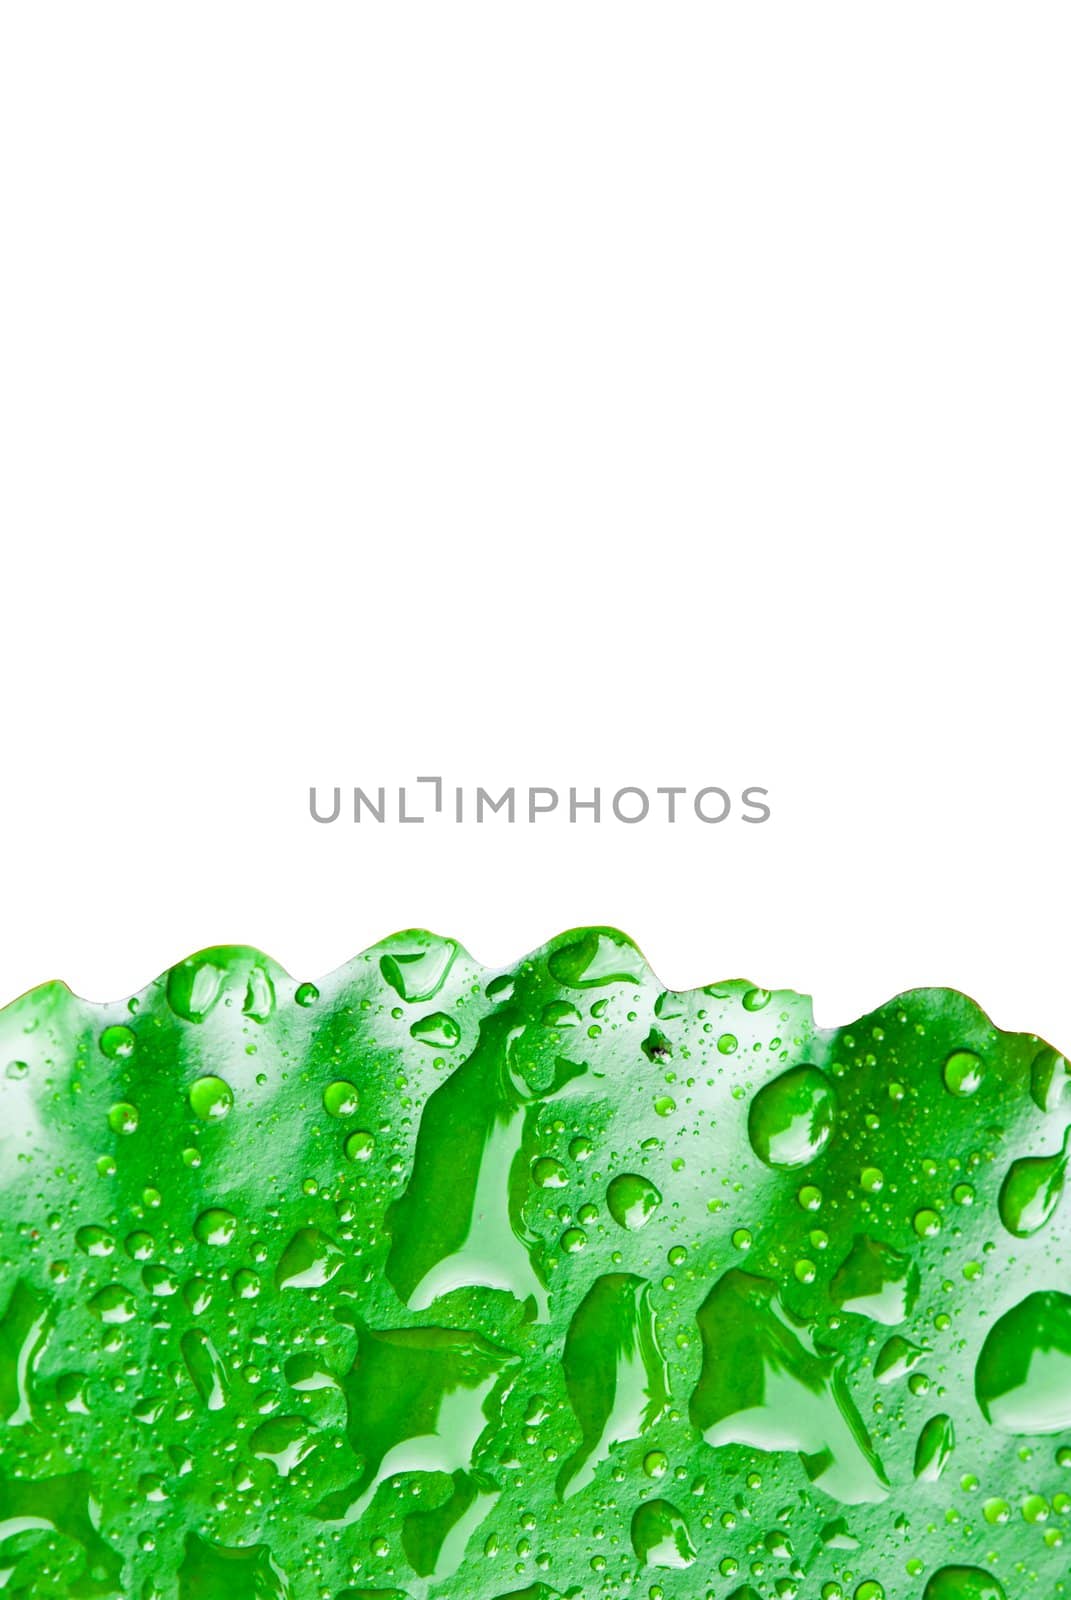 close up of rain drop on lotus leaf on the bottom on white background, can be use for health, environment related conceptual design
